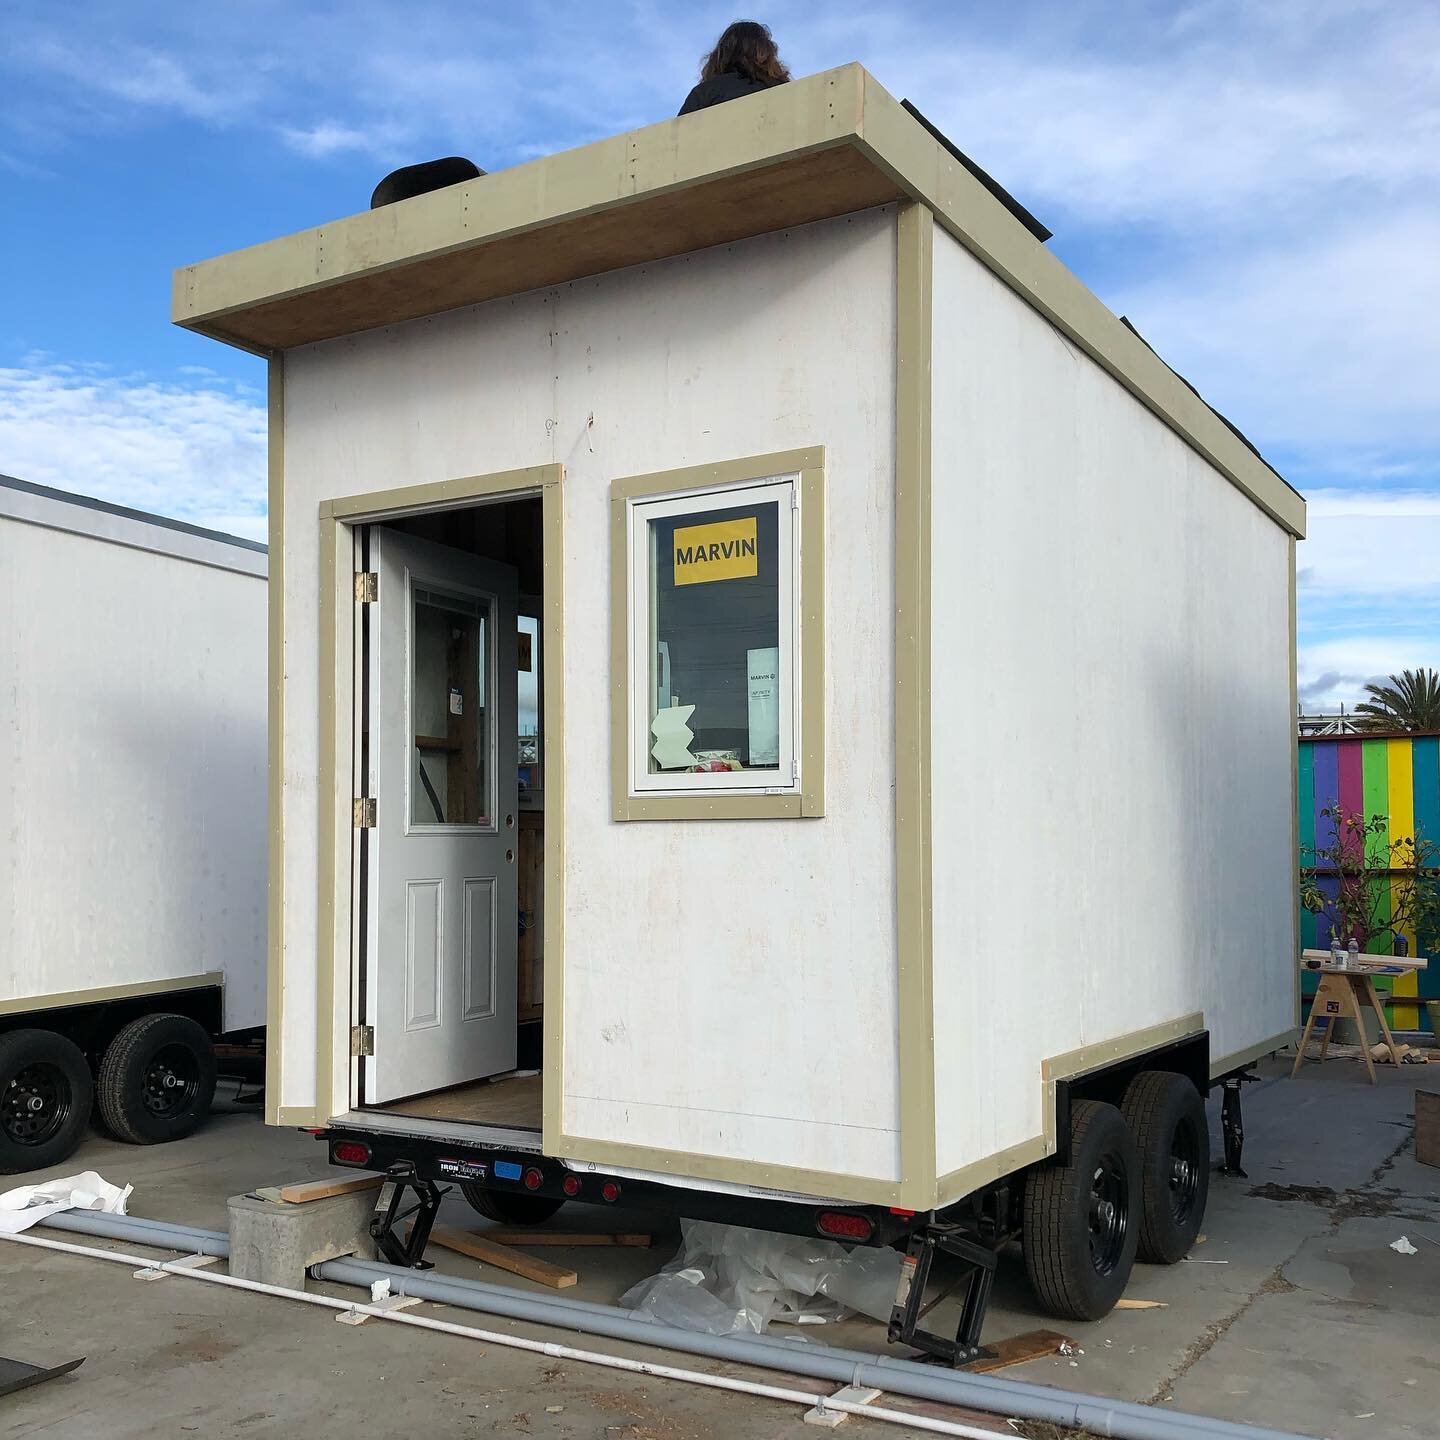 New Tiny House Workshop Series starting in March! In this workshop series you will learn how to read plans and build a tiny house from the ground up. We will be framing, sheathing and roofing a 20 foot trailer. Sign up for the whole 10 days on our we